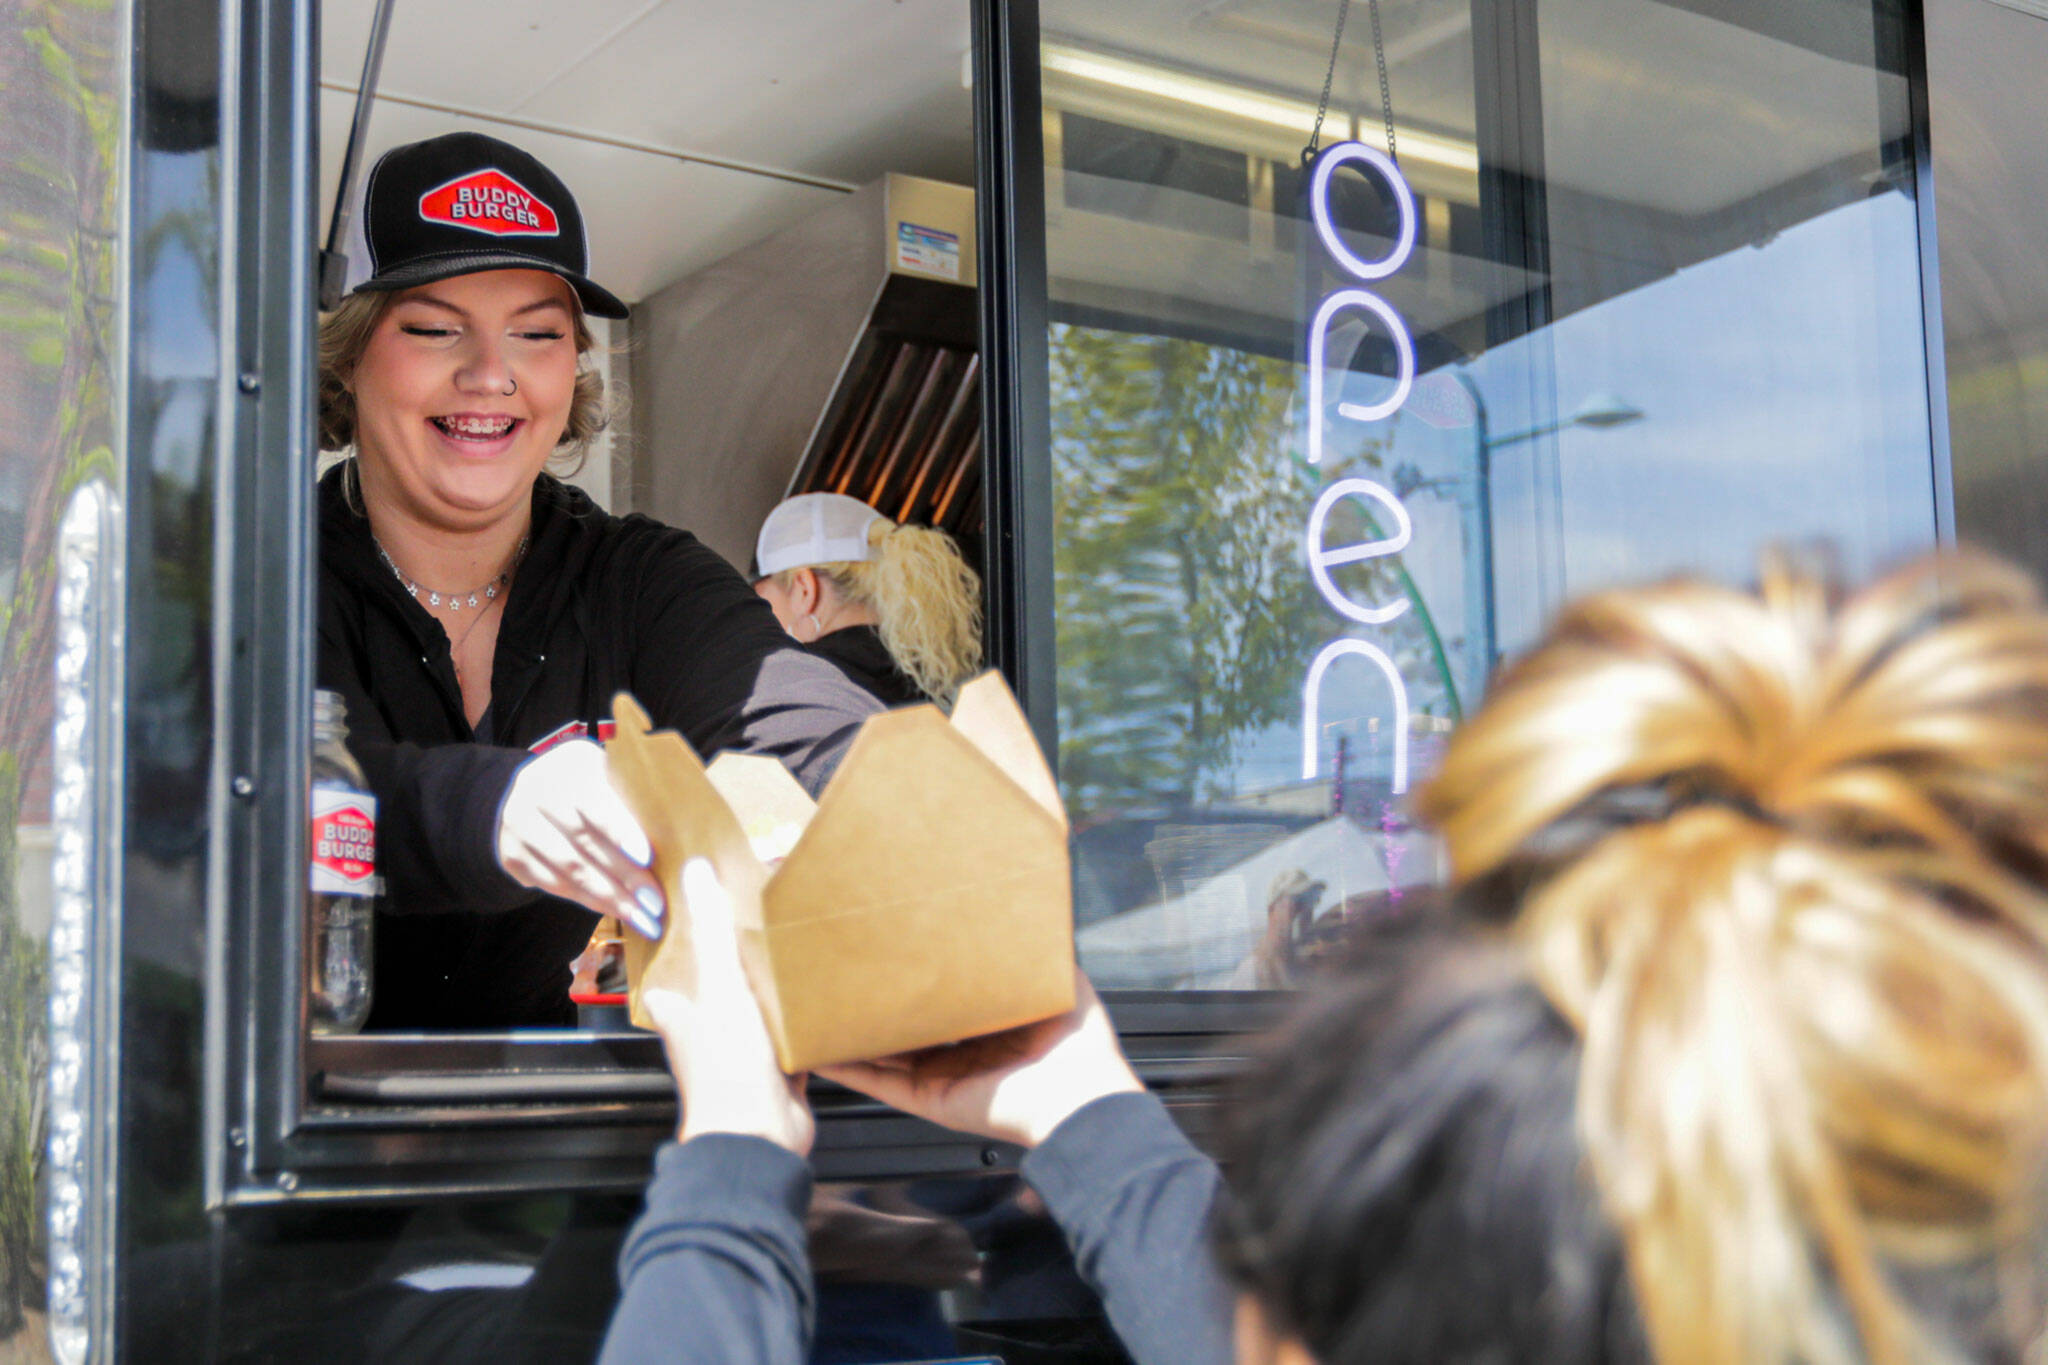 Tiffany Armstrong hands over an order from the Buddy Burger food trailer Saturday morning in Everett. (Kevin Clark / The Herald)